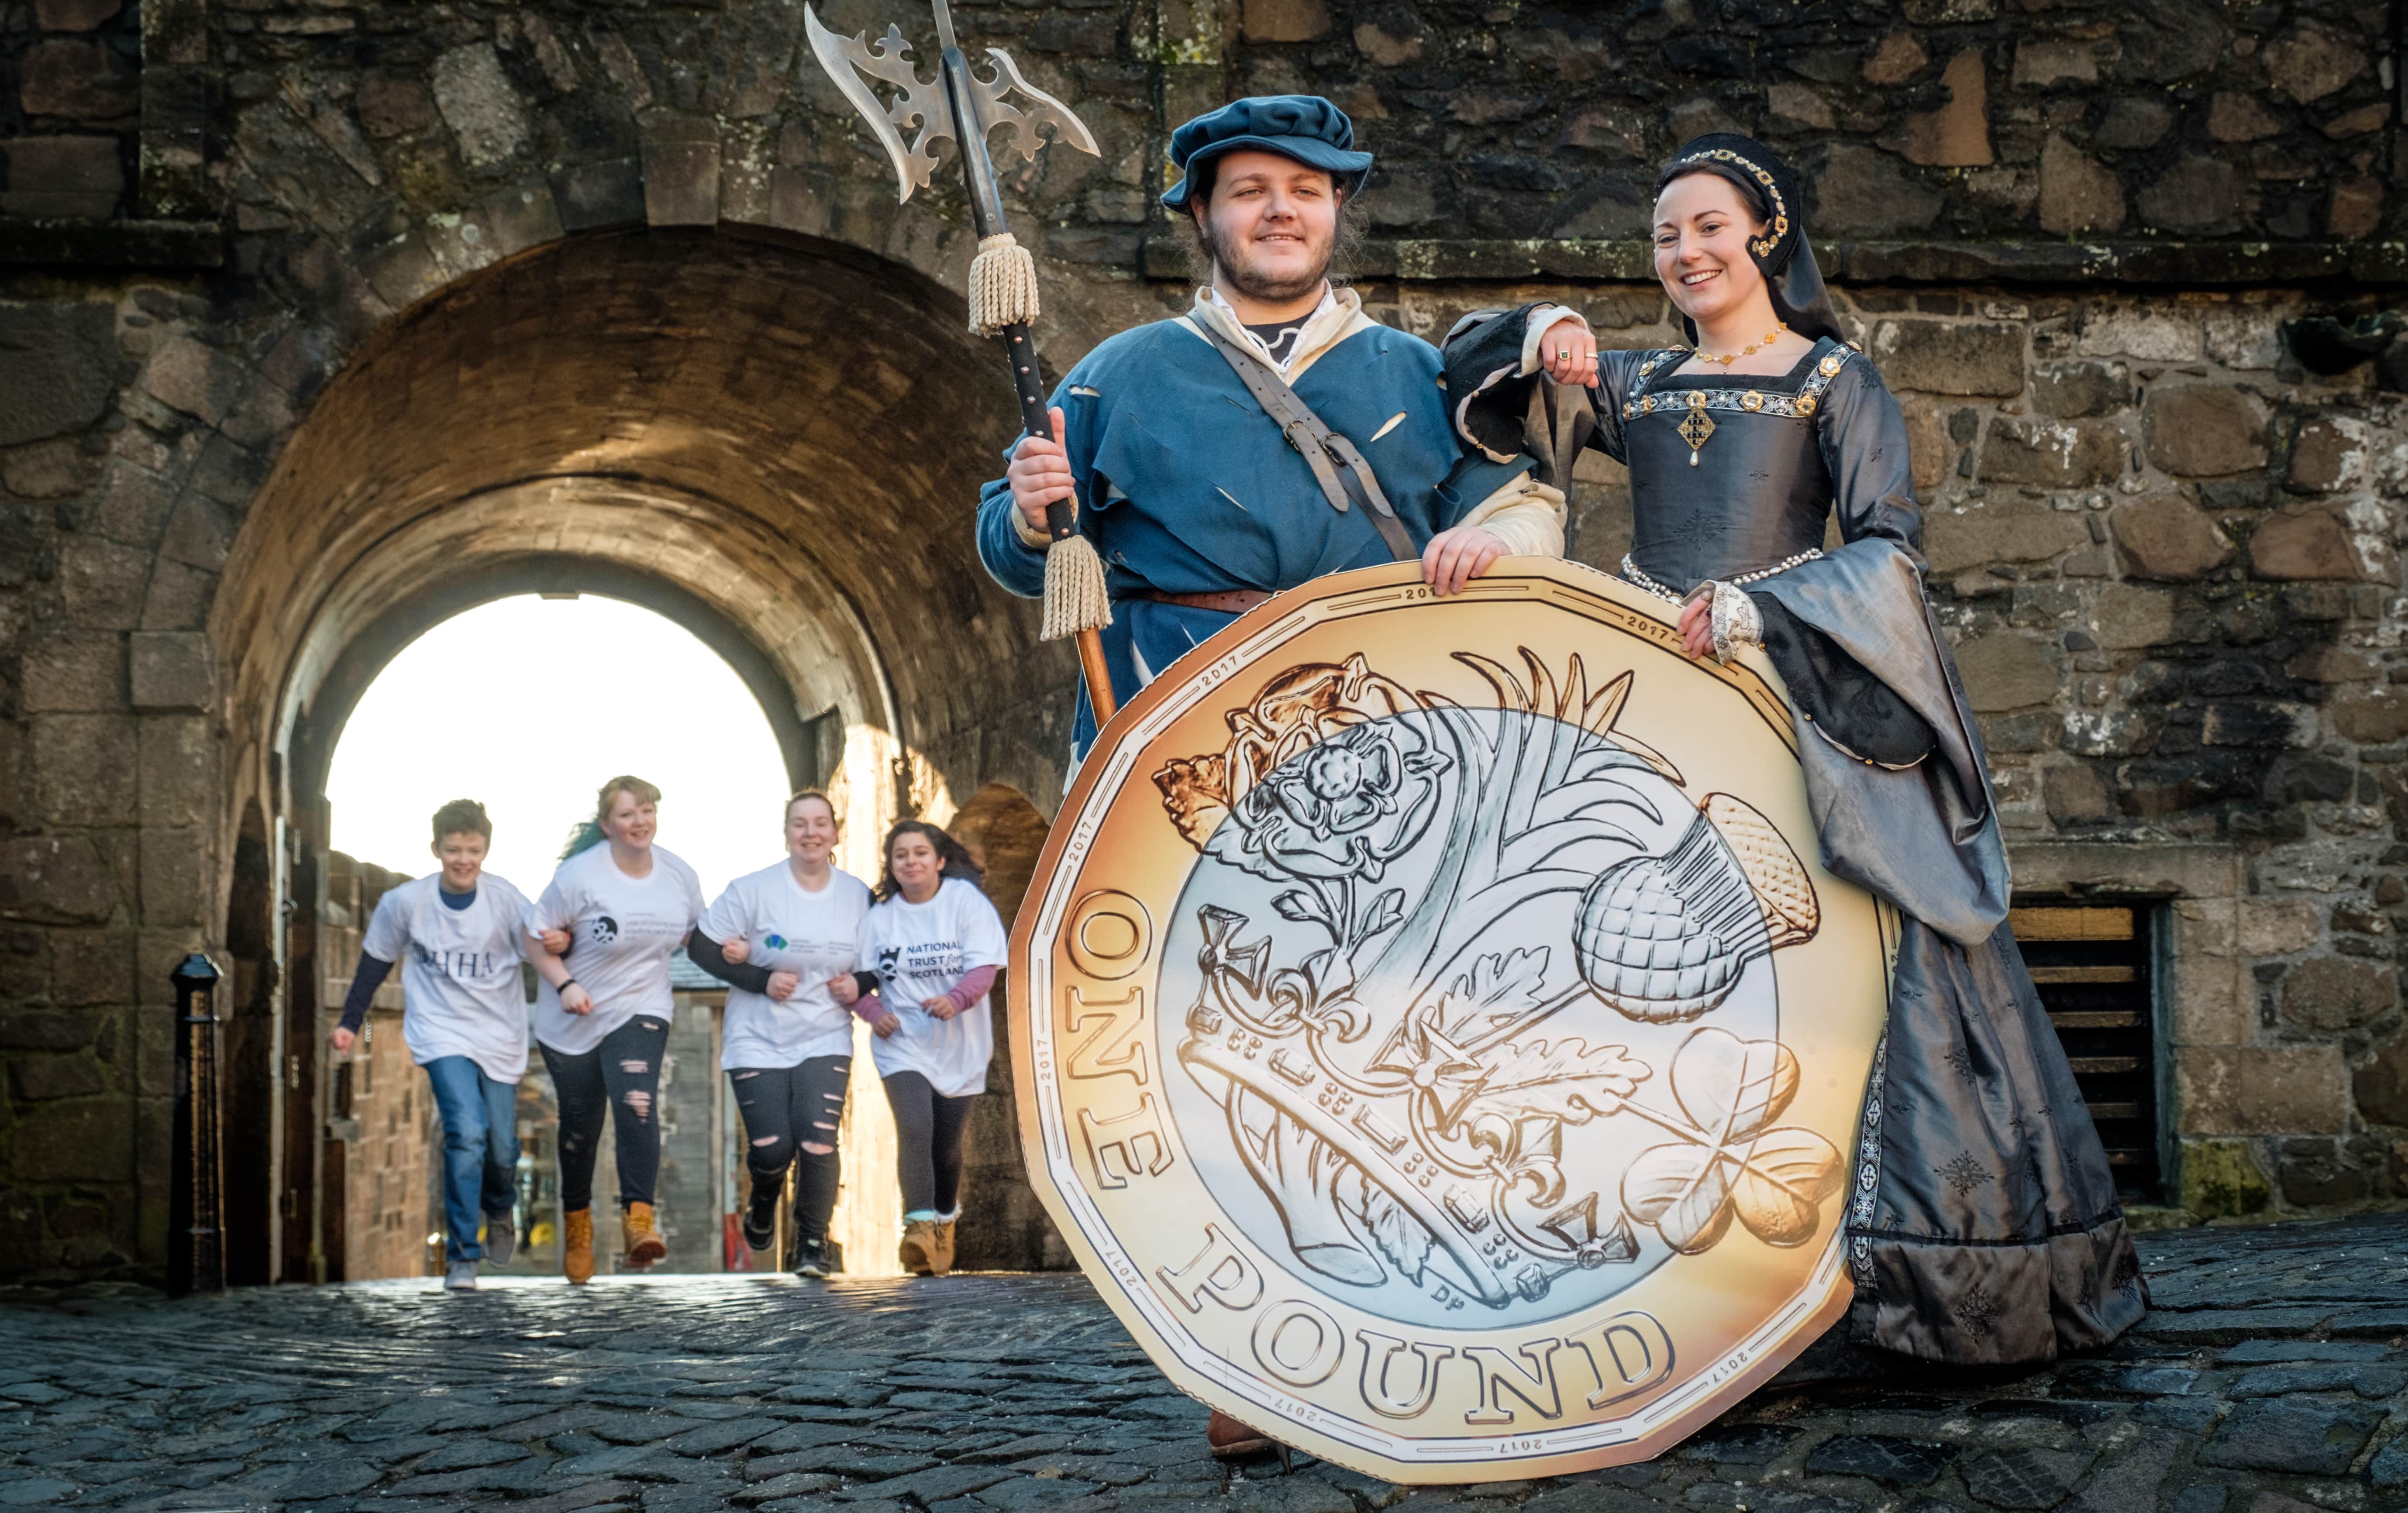 two people in historic costumes hold a giant pound coin whilst behind them a row of four young people run towards them